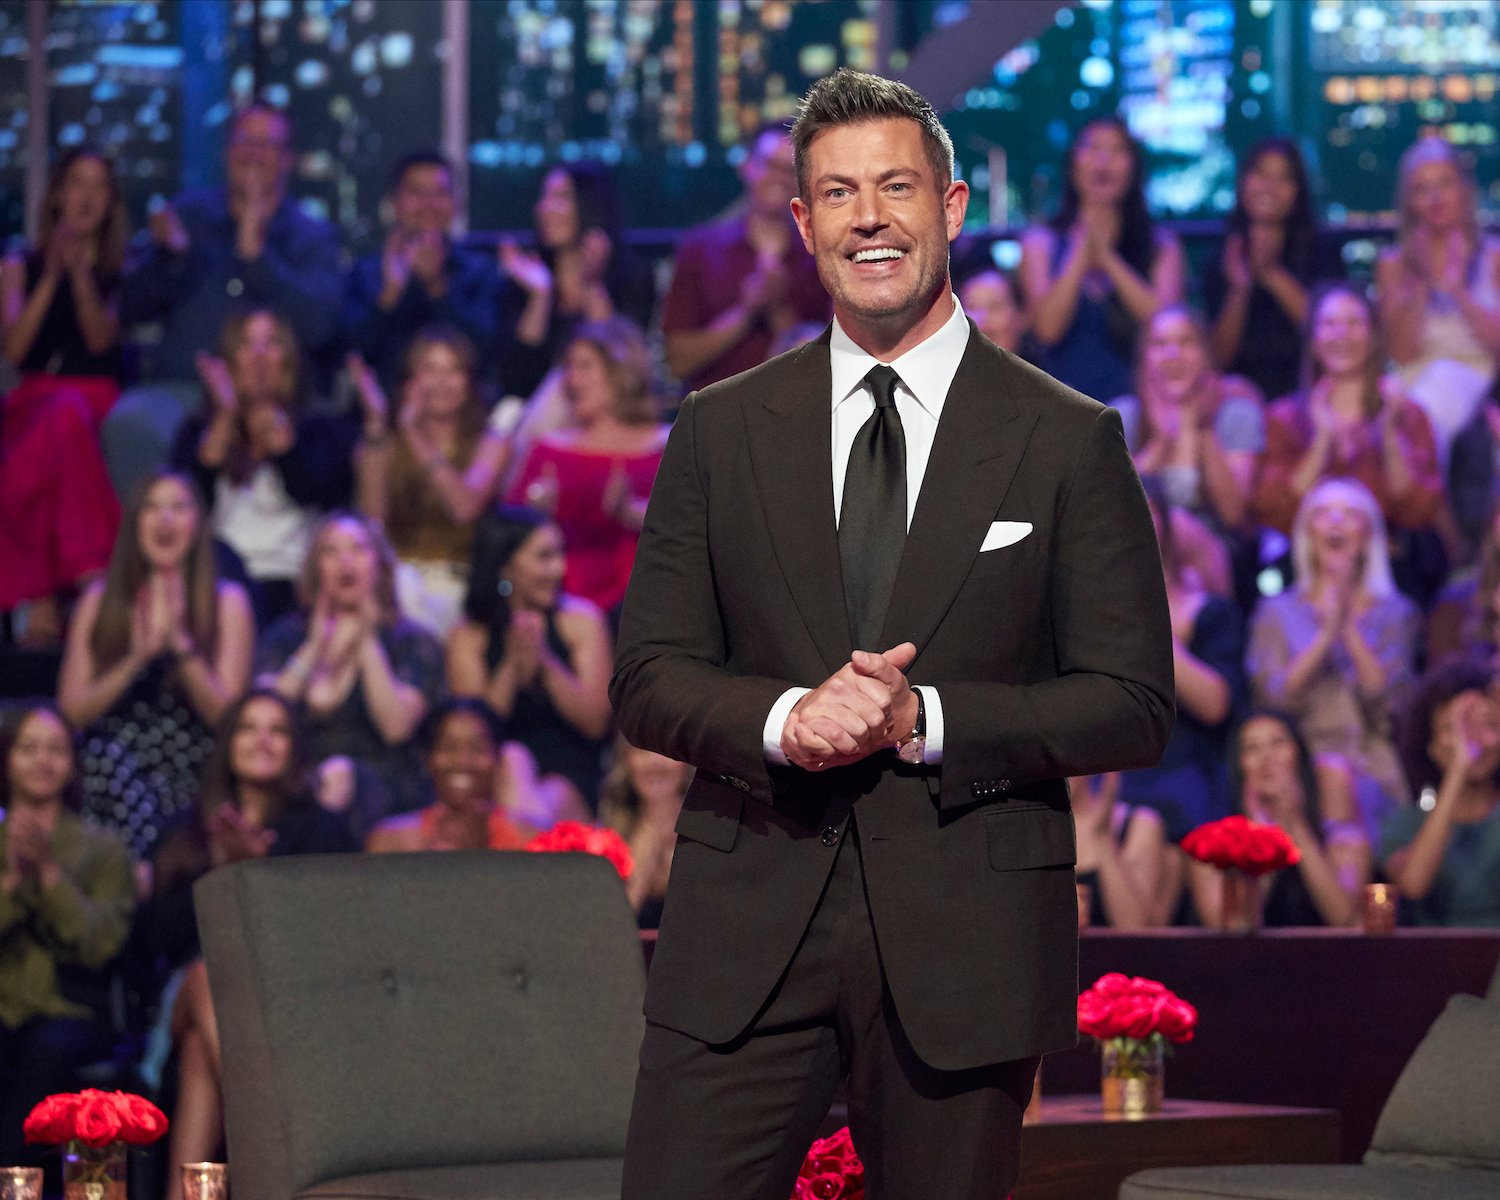 ‘The Bachelorette’: Those Free Cruises for the Audience Aren’t as Great as You Think